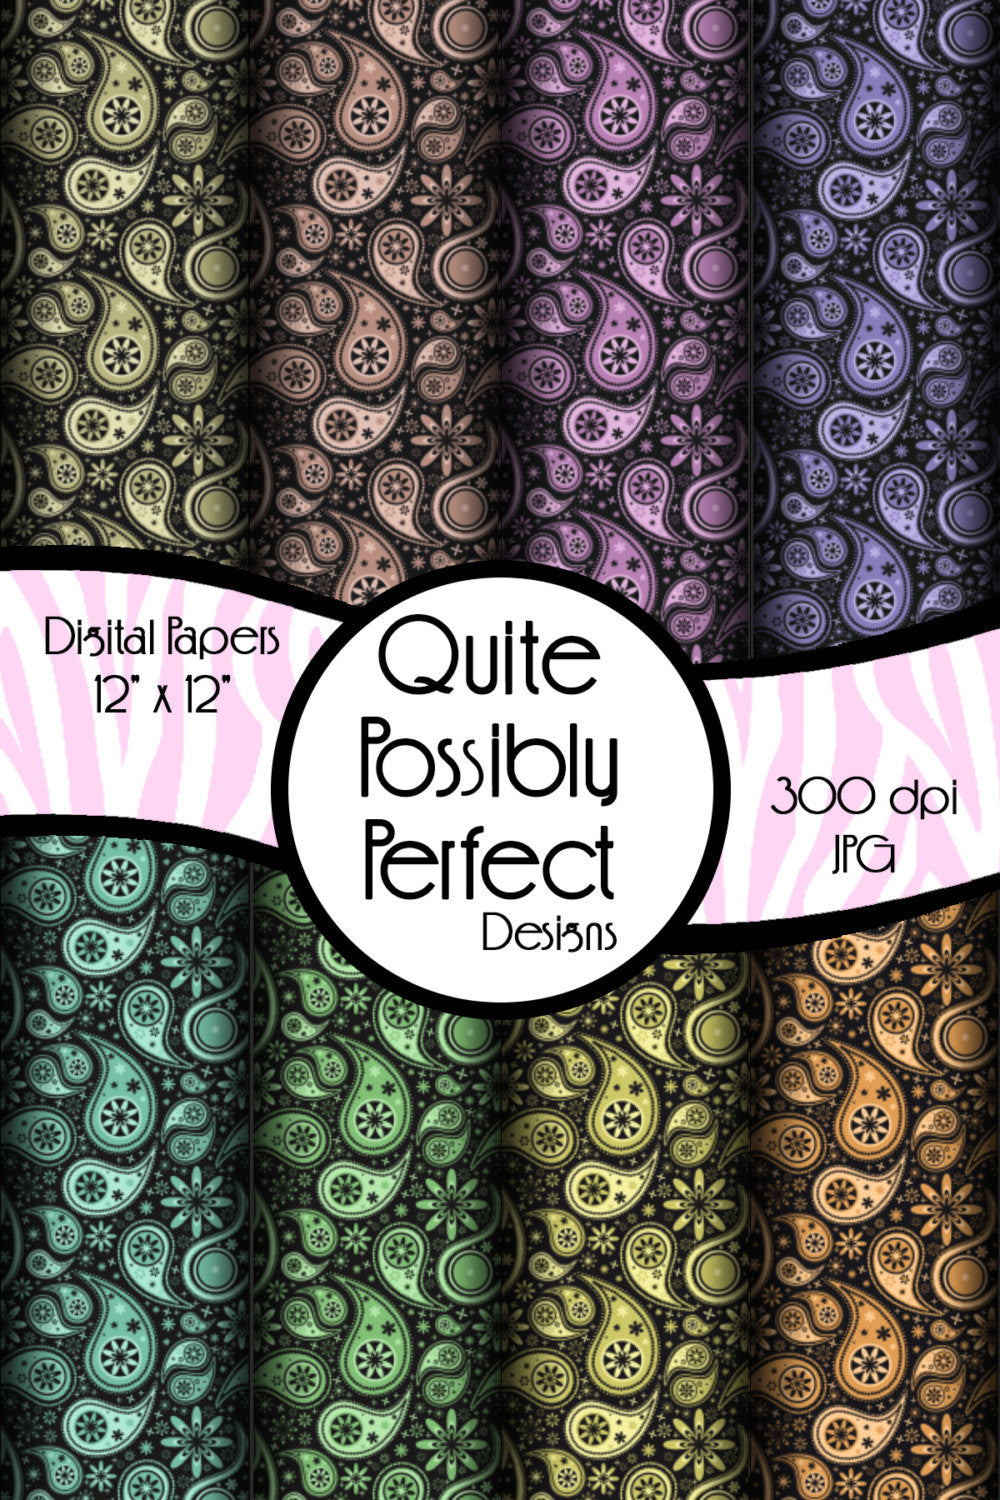 Paisley Digital Paper Pack Instant Download (DGP117) Digital Paper Pack for Scrapbooking, Collage Sheets,Greeting Cards, Bottle Caps